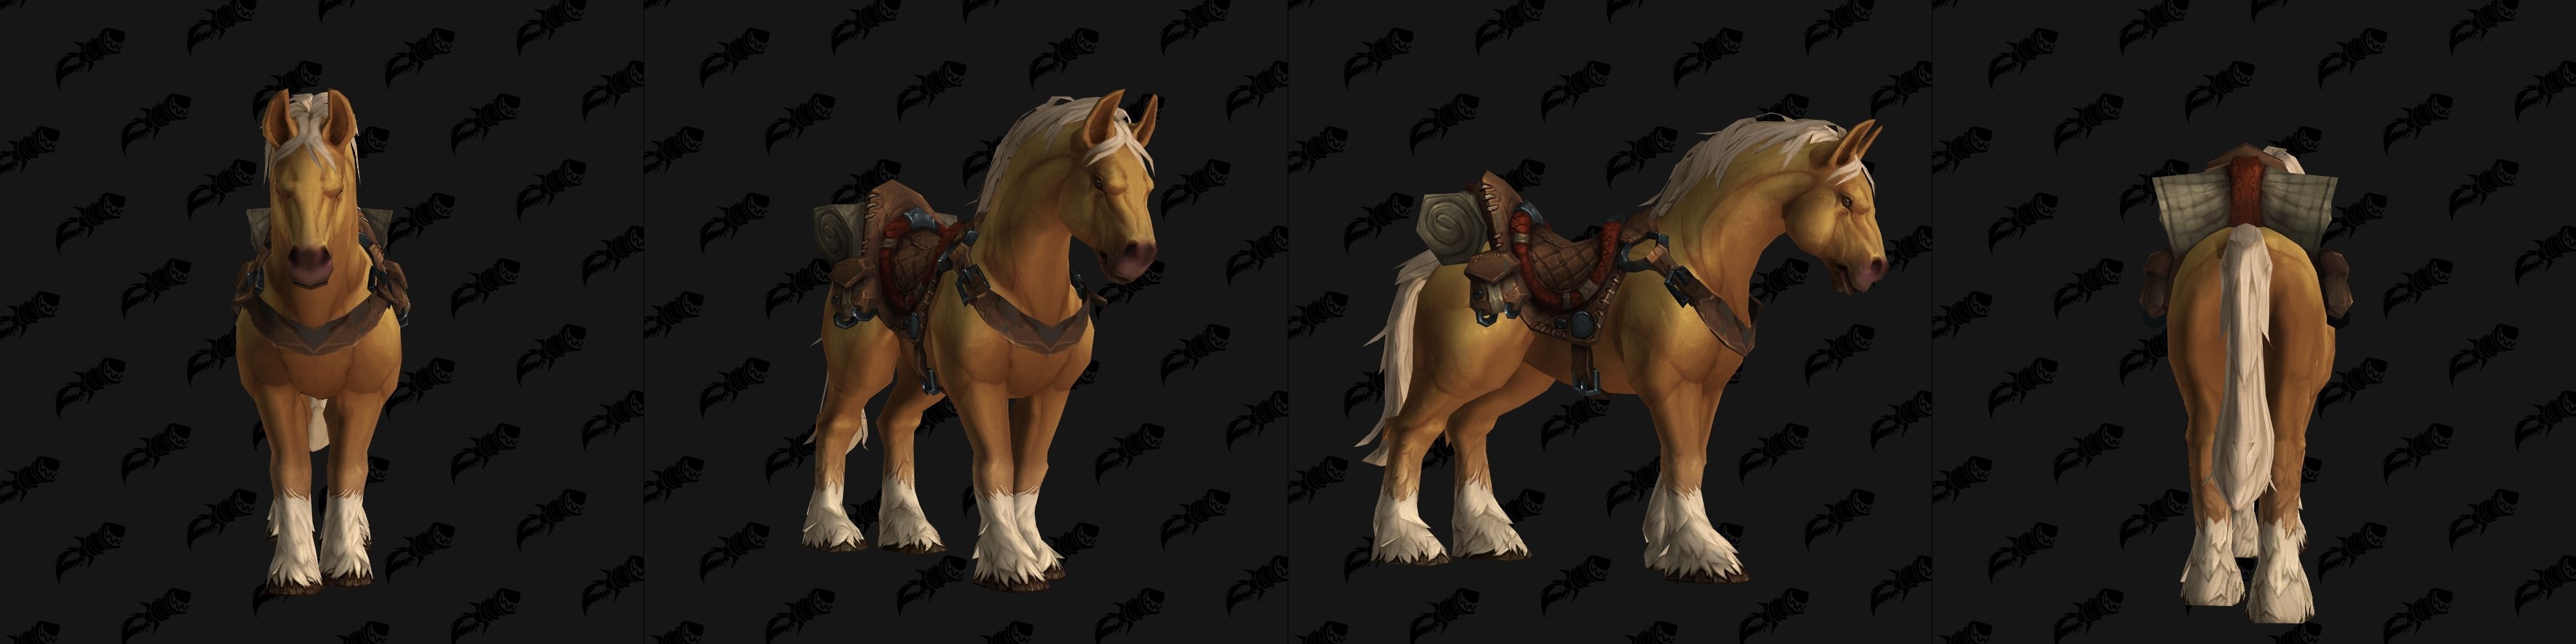 Battle for Azeroth Horse Models and the Norwington Estate Horse Show ...